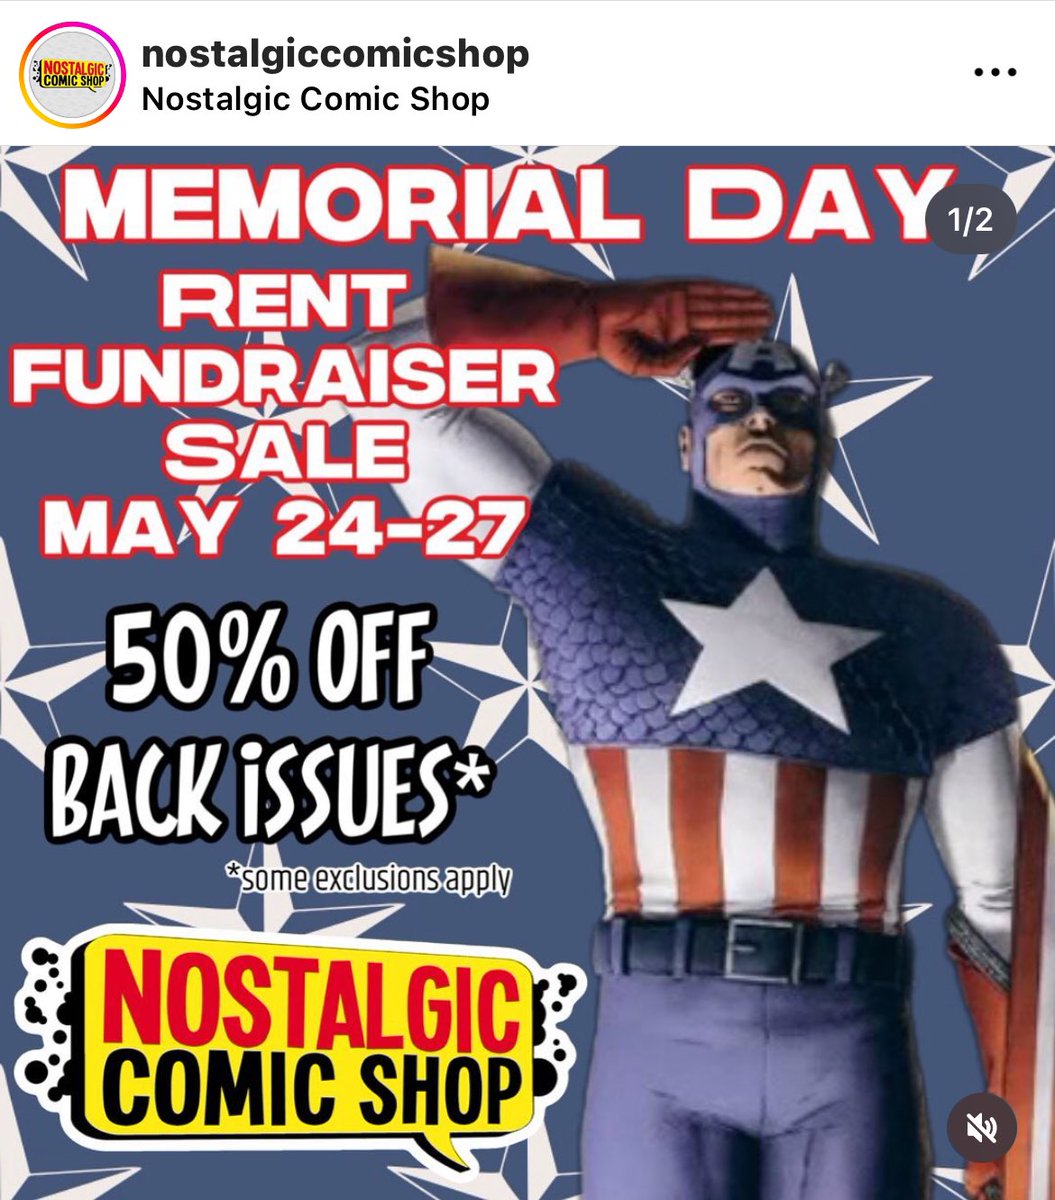 🚨 @NostalgicComics is a beloved Latino-owned neighborhood LCS in San Gabriel, California. Their bank account was hacked, and their assets are frozen during recovery. They have a Memorial Day sale this weekend to cover bills. Stop by if you're near and give em some business.